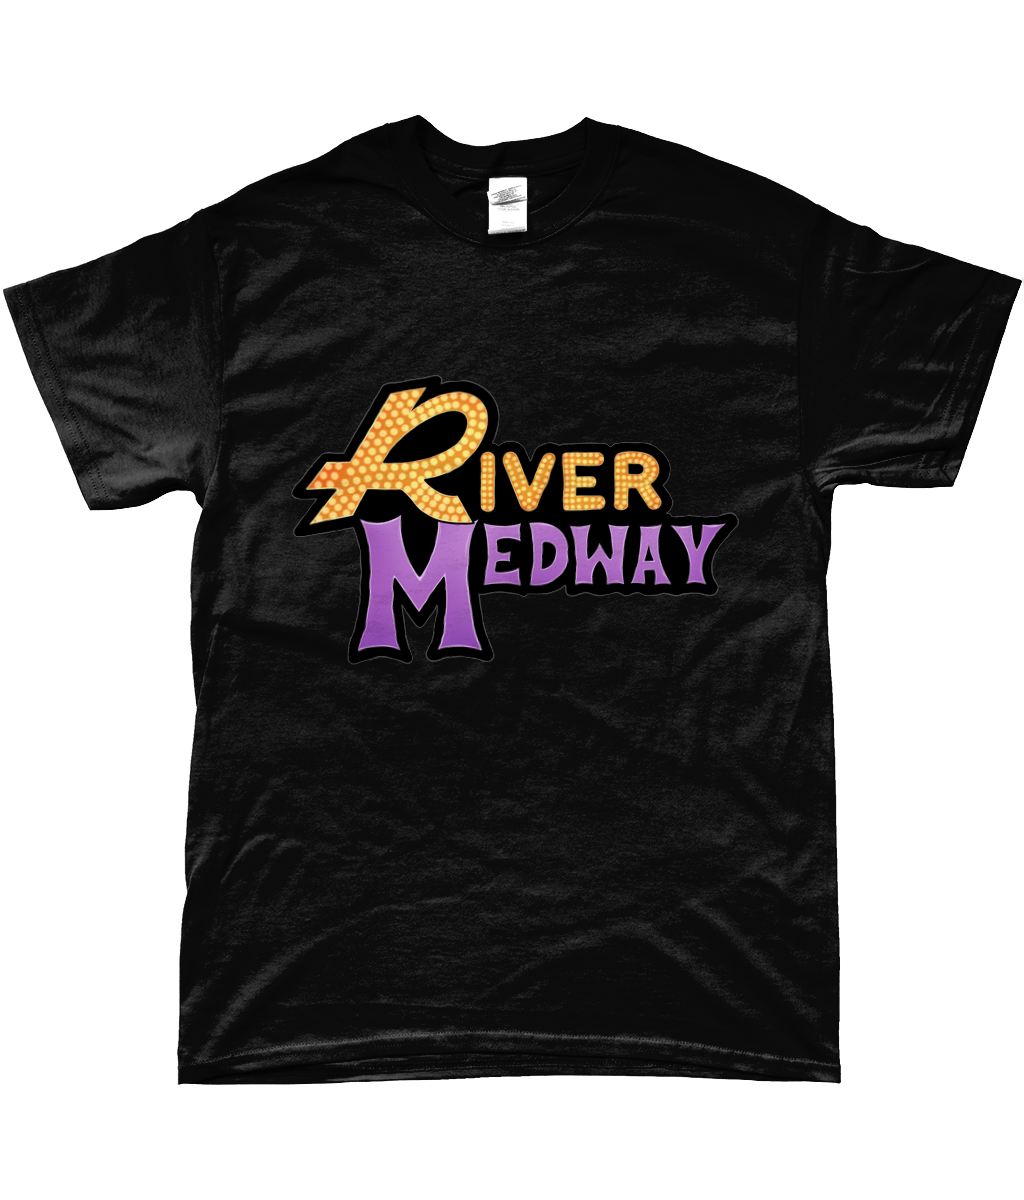 River Medway Classic Logo T